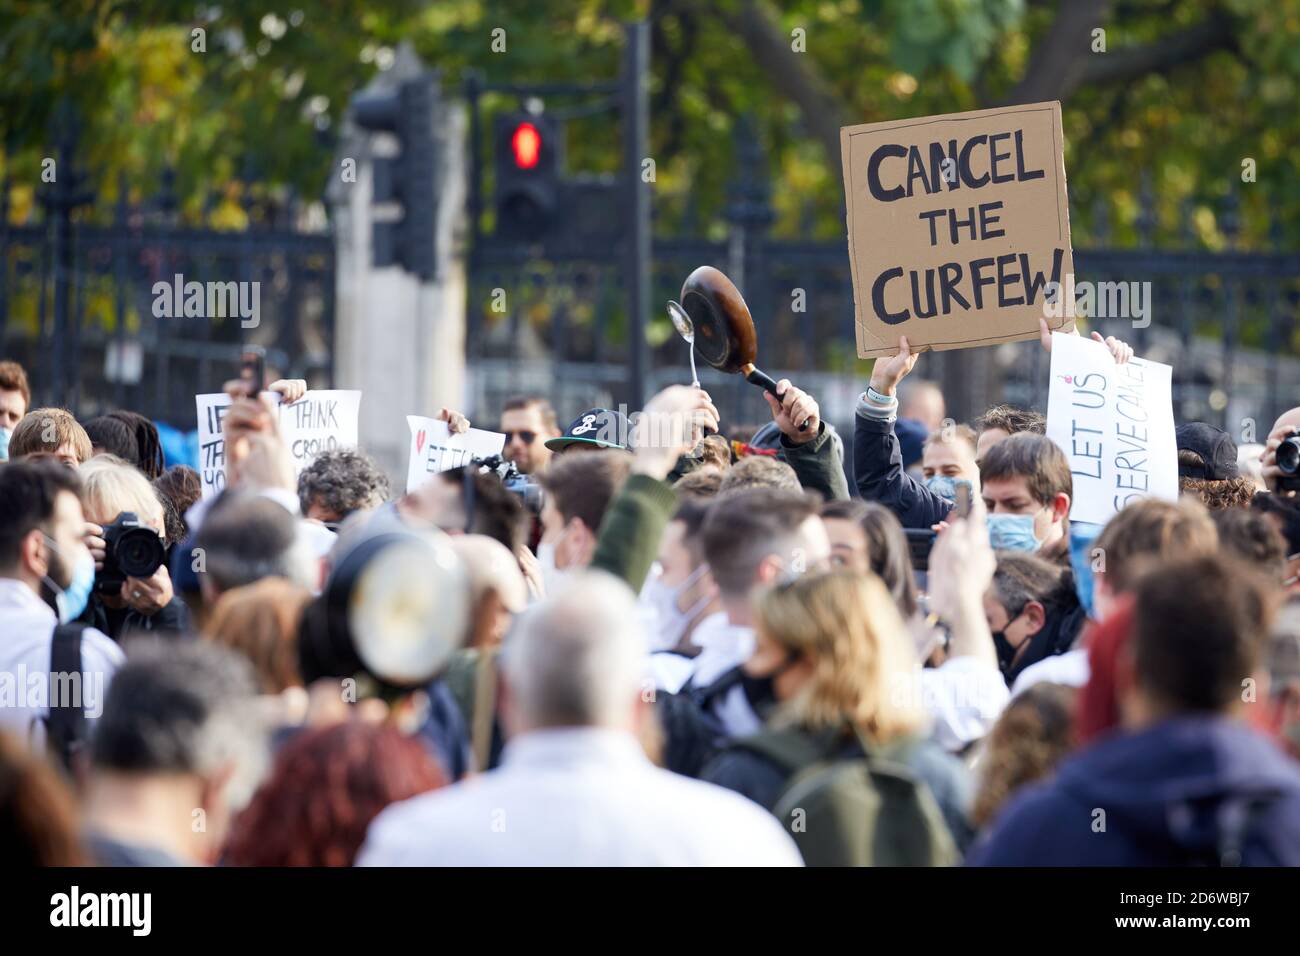 London, UK. - 19 Oct 2020: A placard is held aloft above hospitality workers protesting in Parliament Square against the UK’s coronavirus restrictions, which they say will devastate their industry. Stock Photo